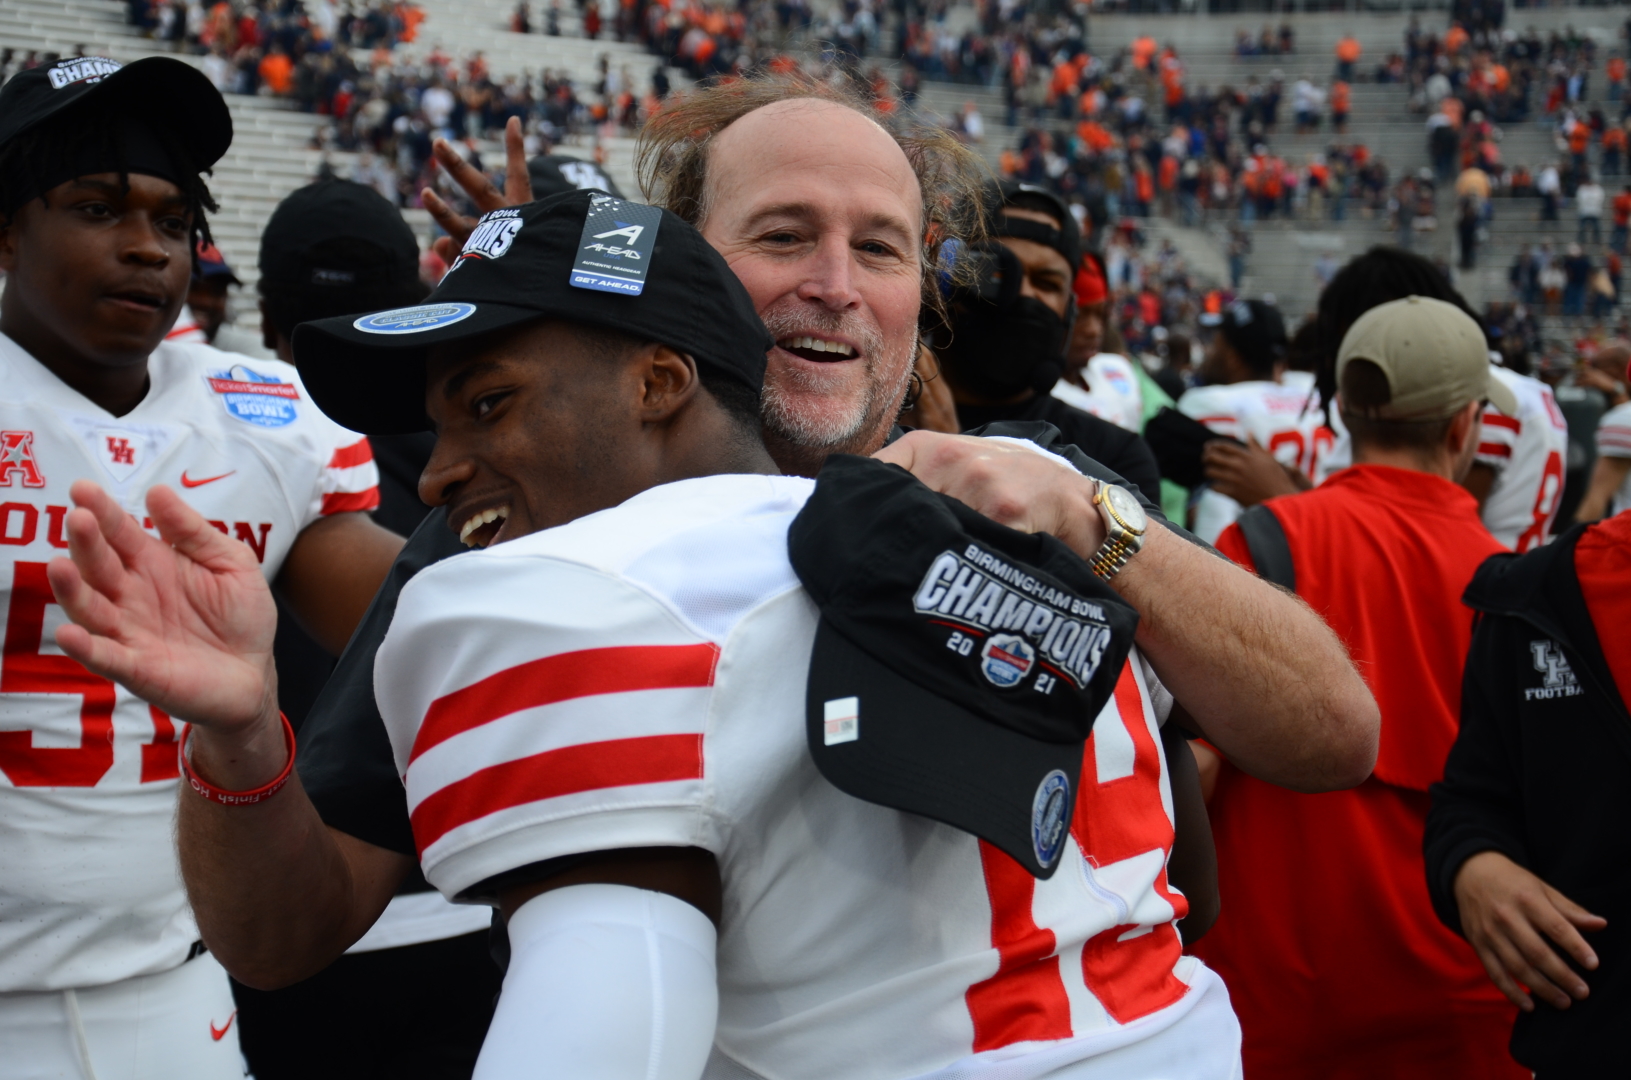 Dana Holgorsen embraced his players with lots of smiles and hugs to celebrate UH football's Birmingham Bowl victory over Auburn on Tuesday. | Steven Paultanis/The Cougar